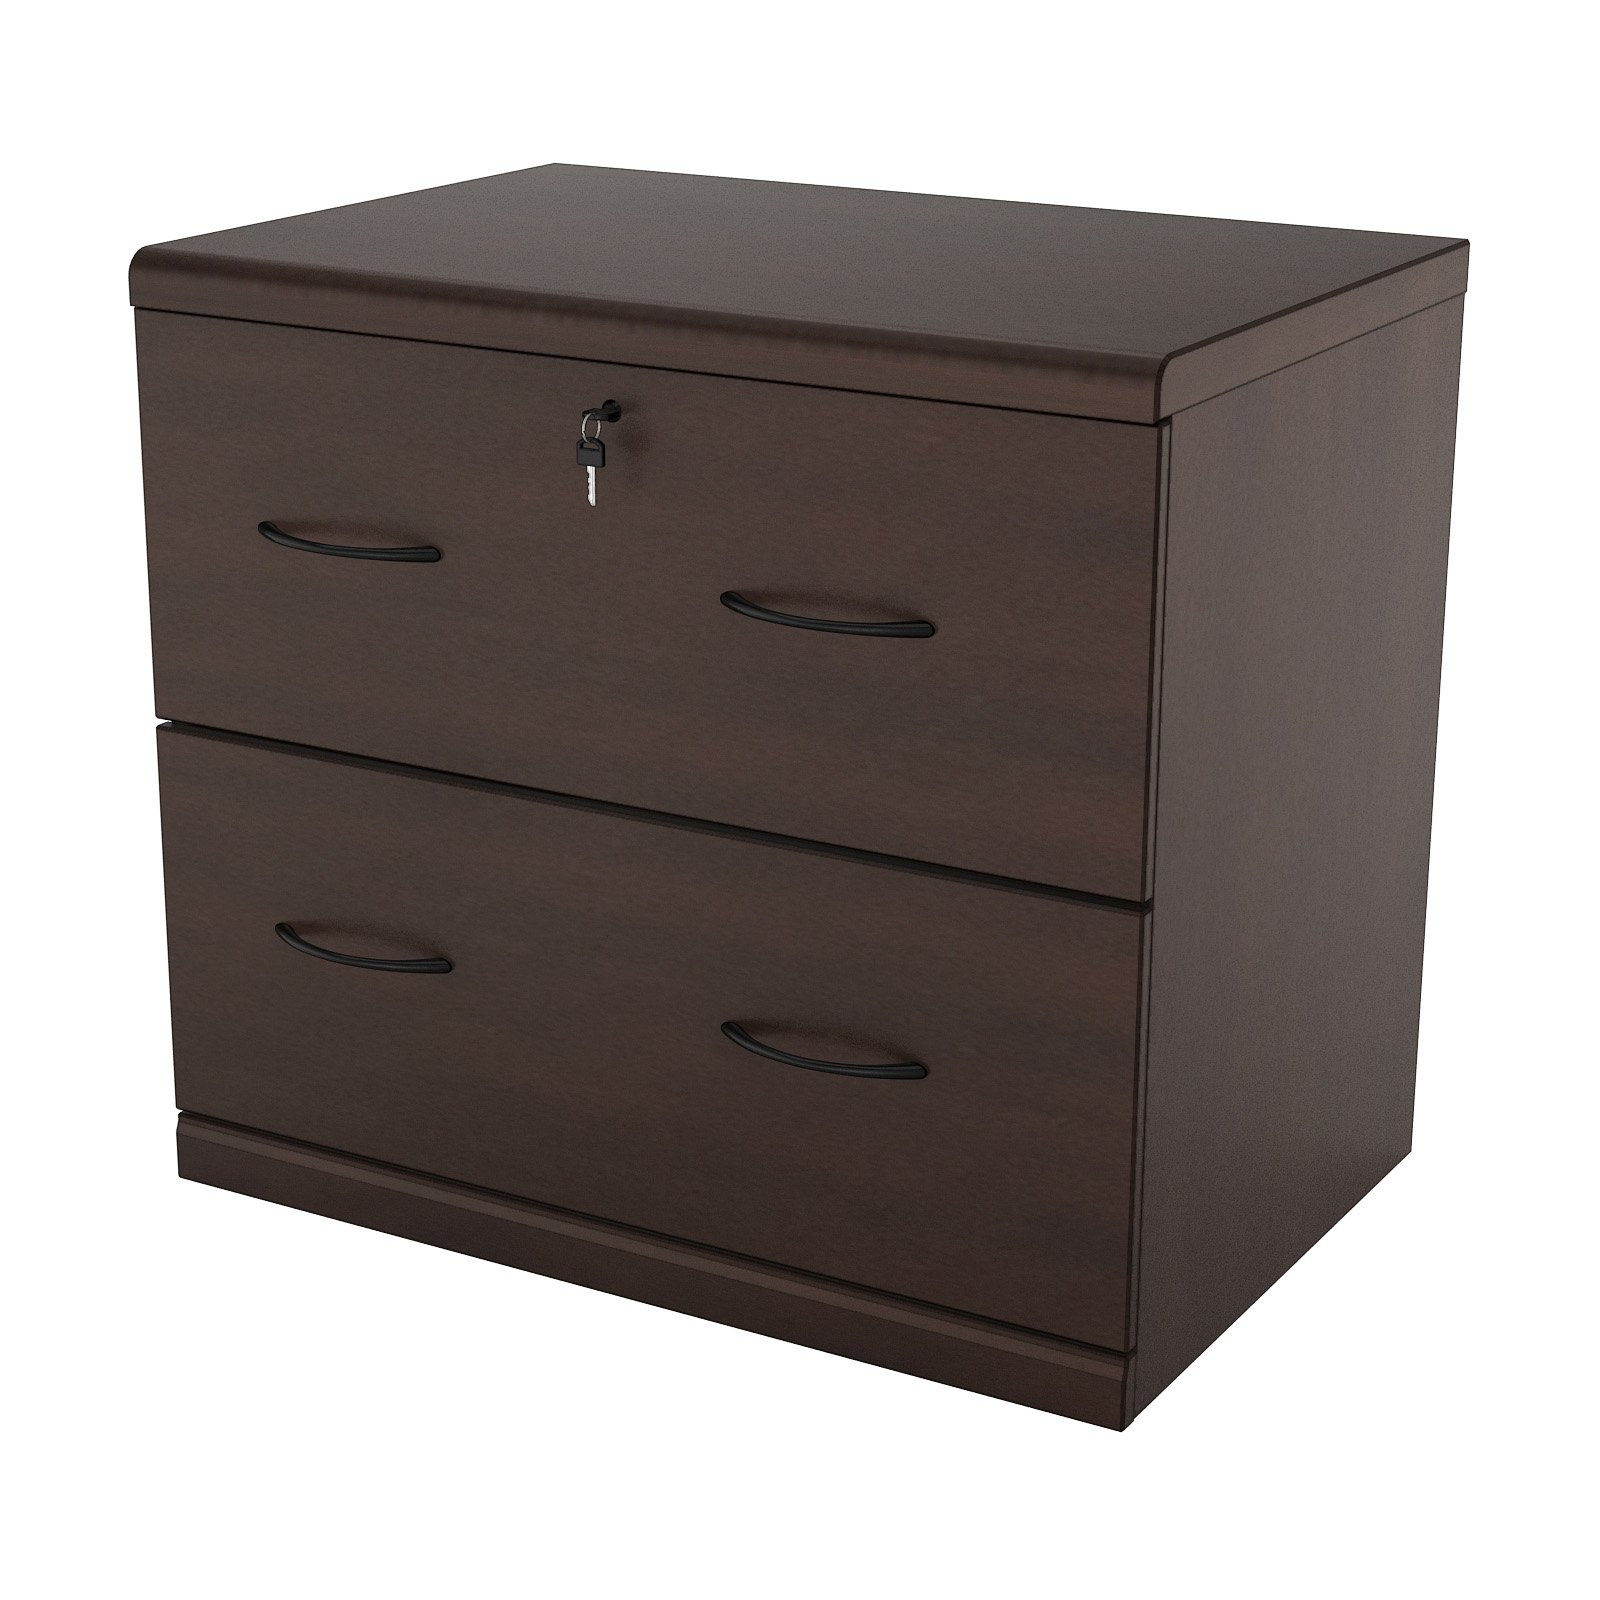 2 Drawer Lateral Wood Lockable Filing Cabinet Espresso Walmart within proportions 1600 X 1600